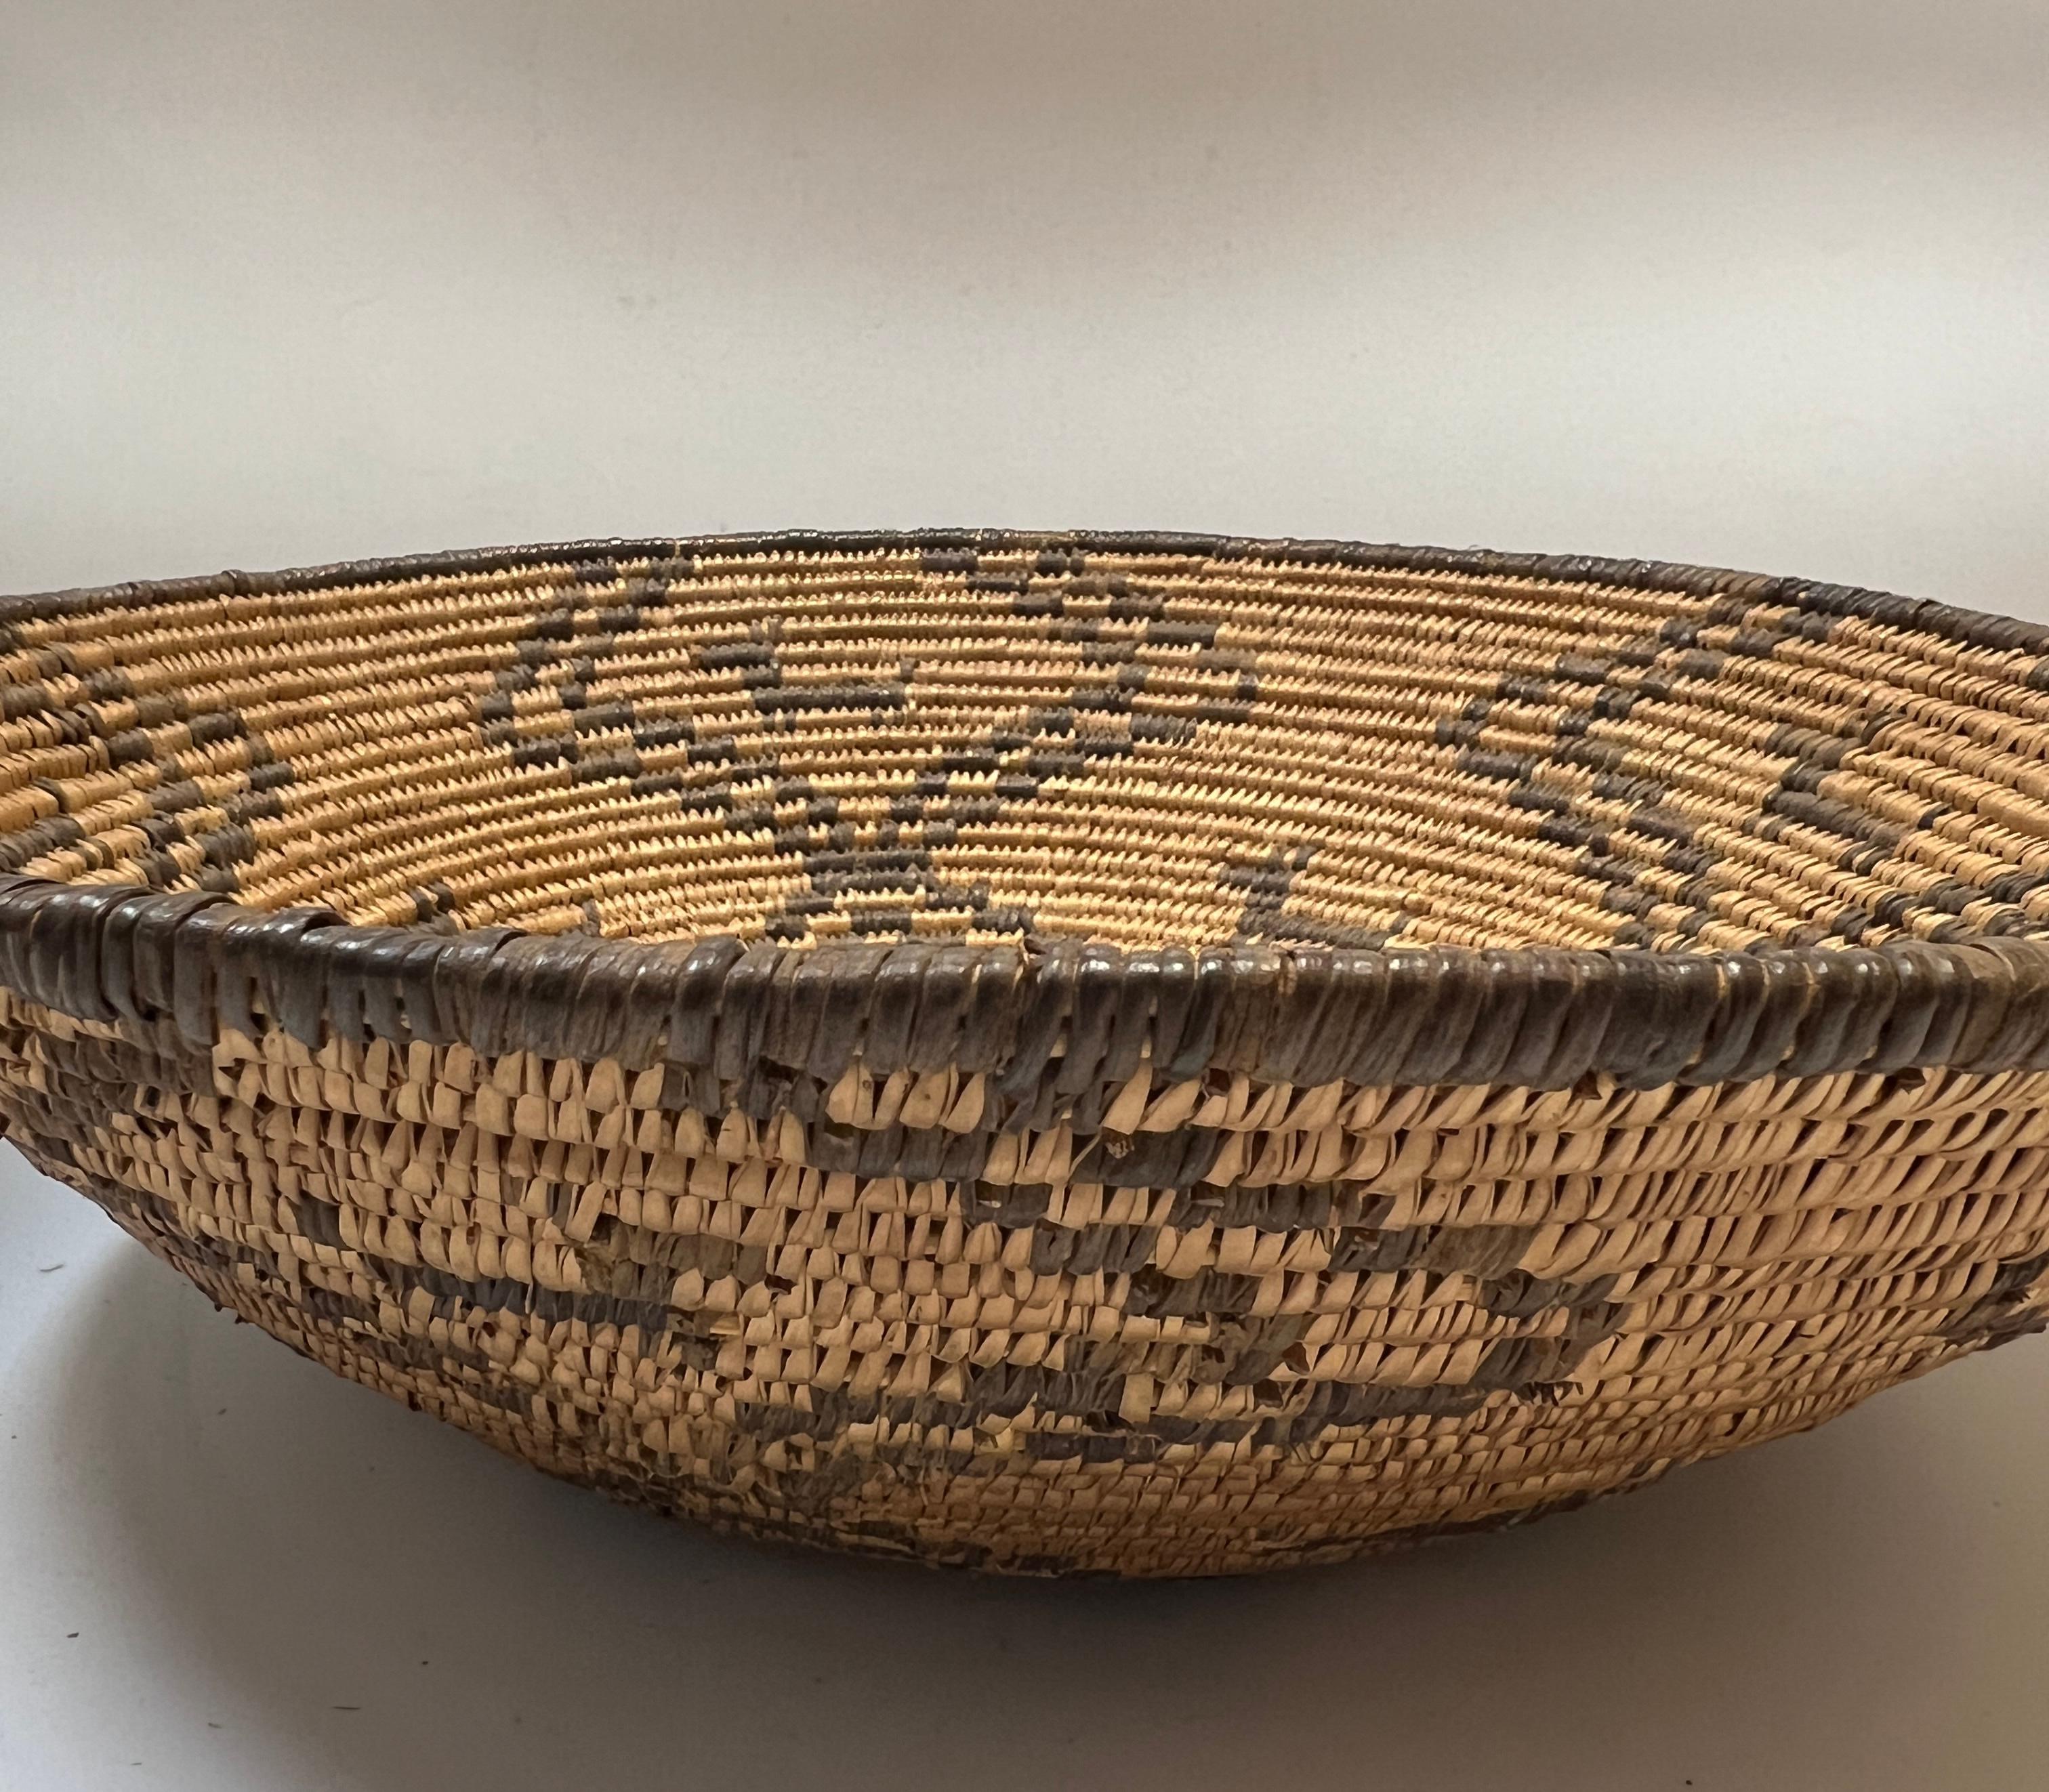 Woven Apache basket with dog motif
Late 19th century - Early 20th Century
Woven from Willow and Devil's claw

Apache is a collective term for several culturally related groups of Native Americans living primarily in the Southwest, which includes the